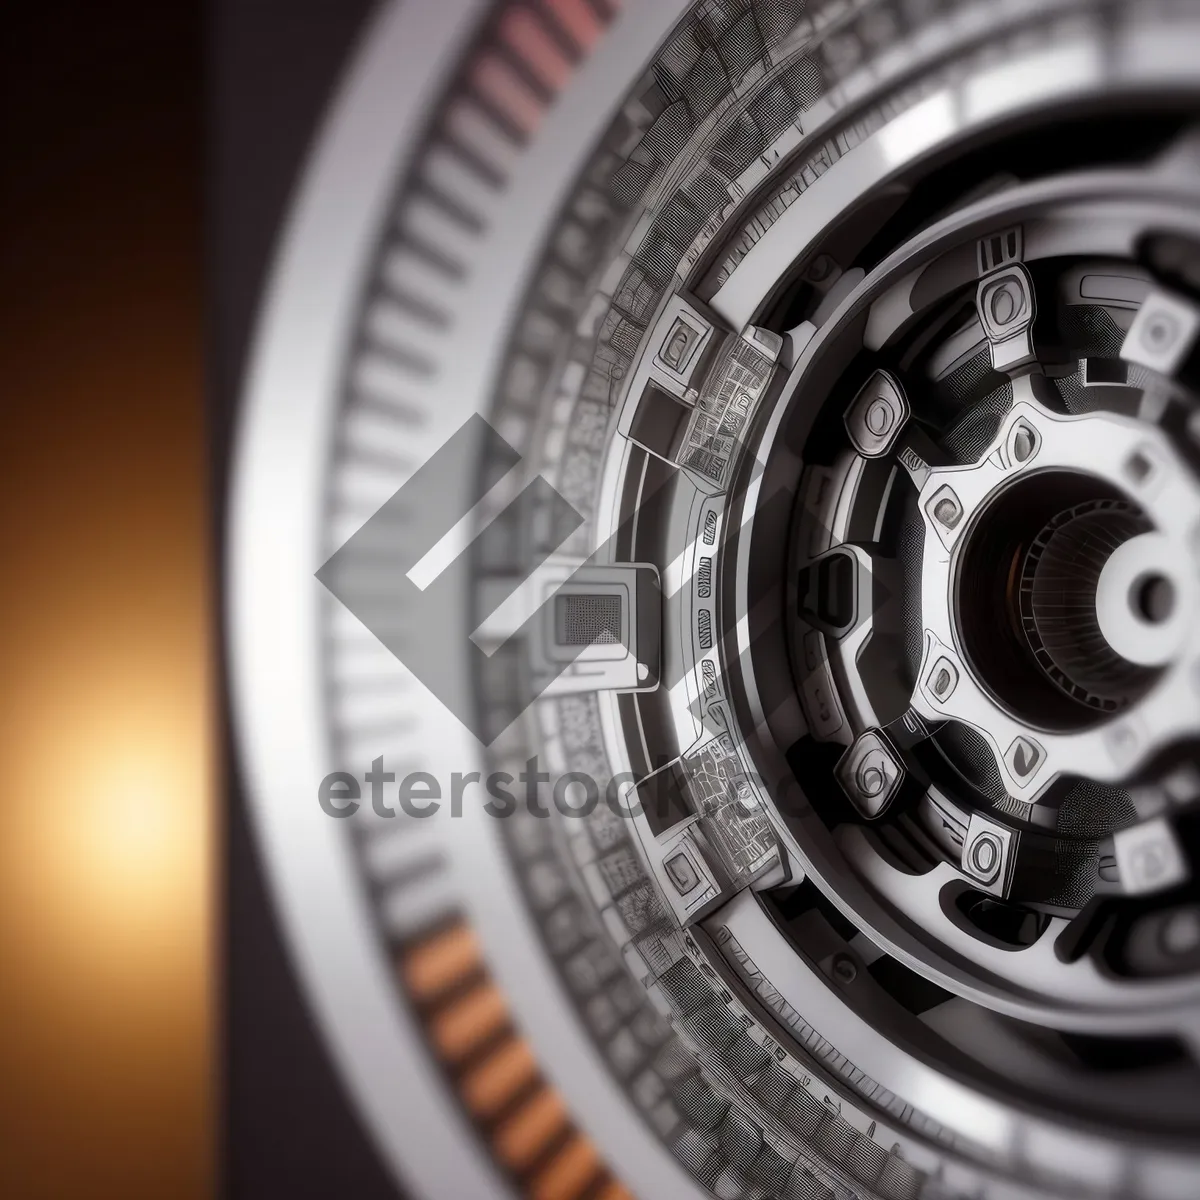 Picture of Mechanical Gear Close-up: Photography Equipment Technology